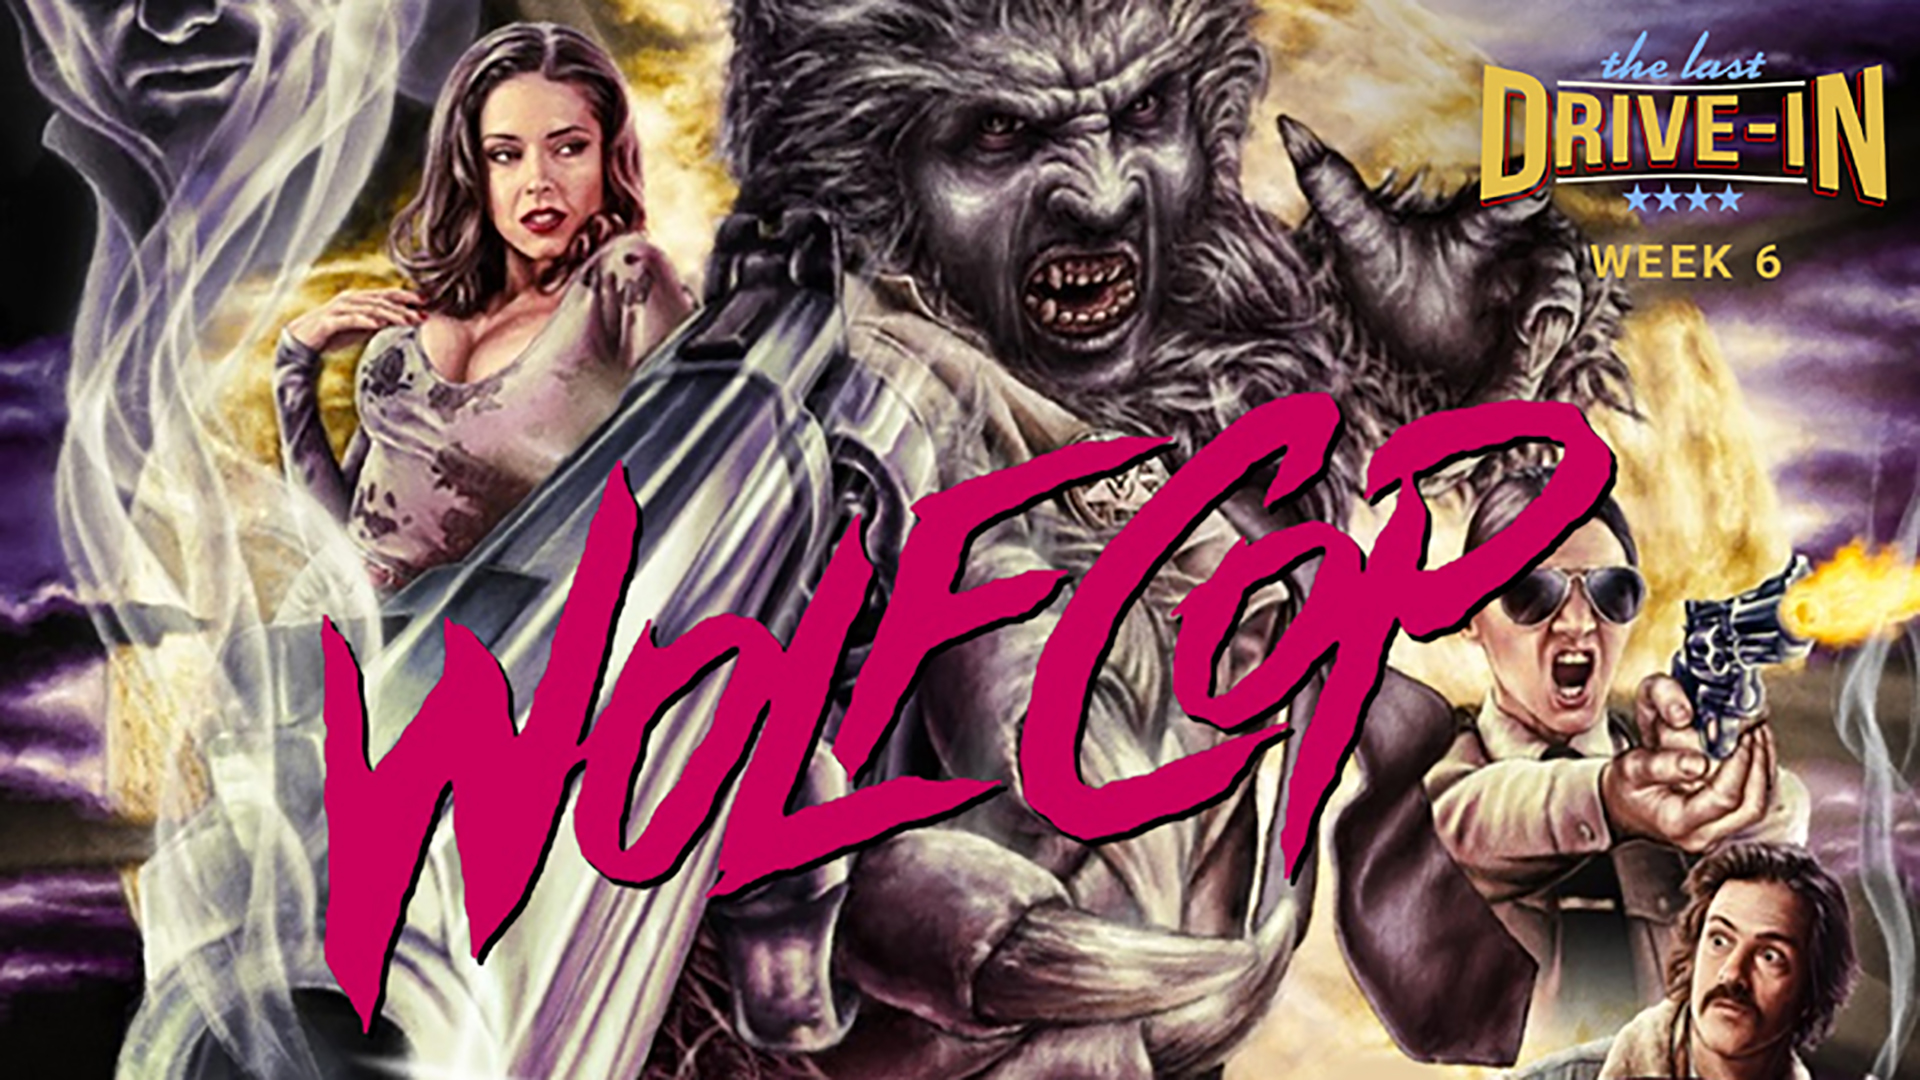 Week 6: Wolfcop, This half-man, half-beast is not just a cop... he's a WOLFCOP., TV-MA, Season 1028421, Episode 11